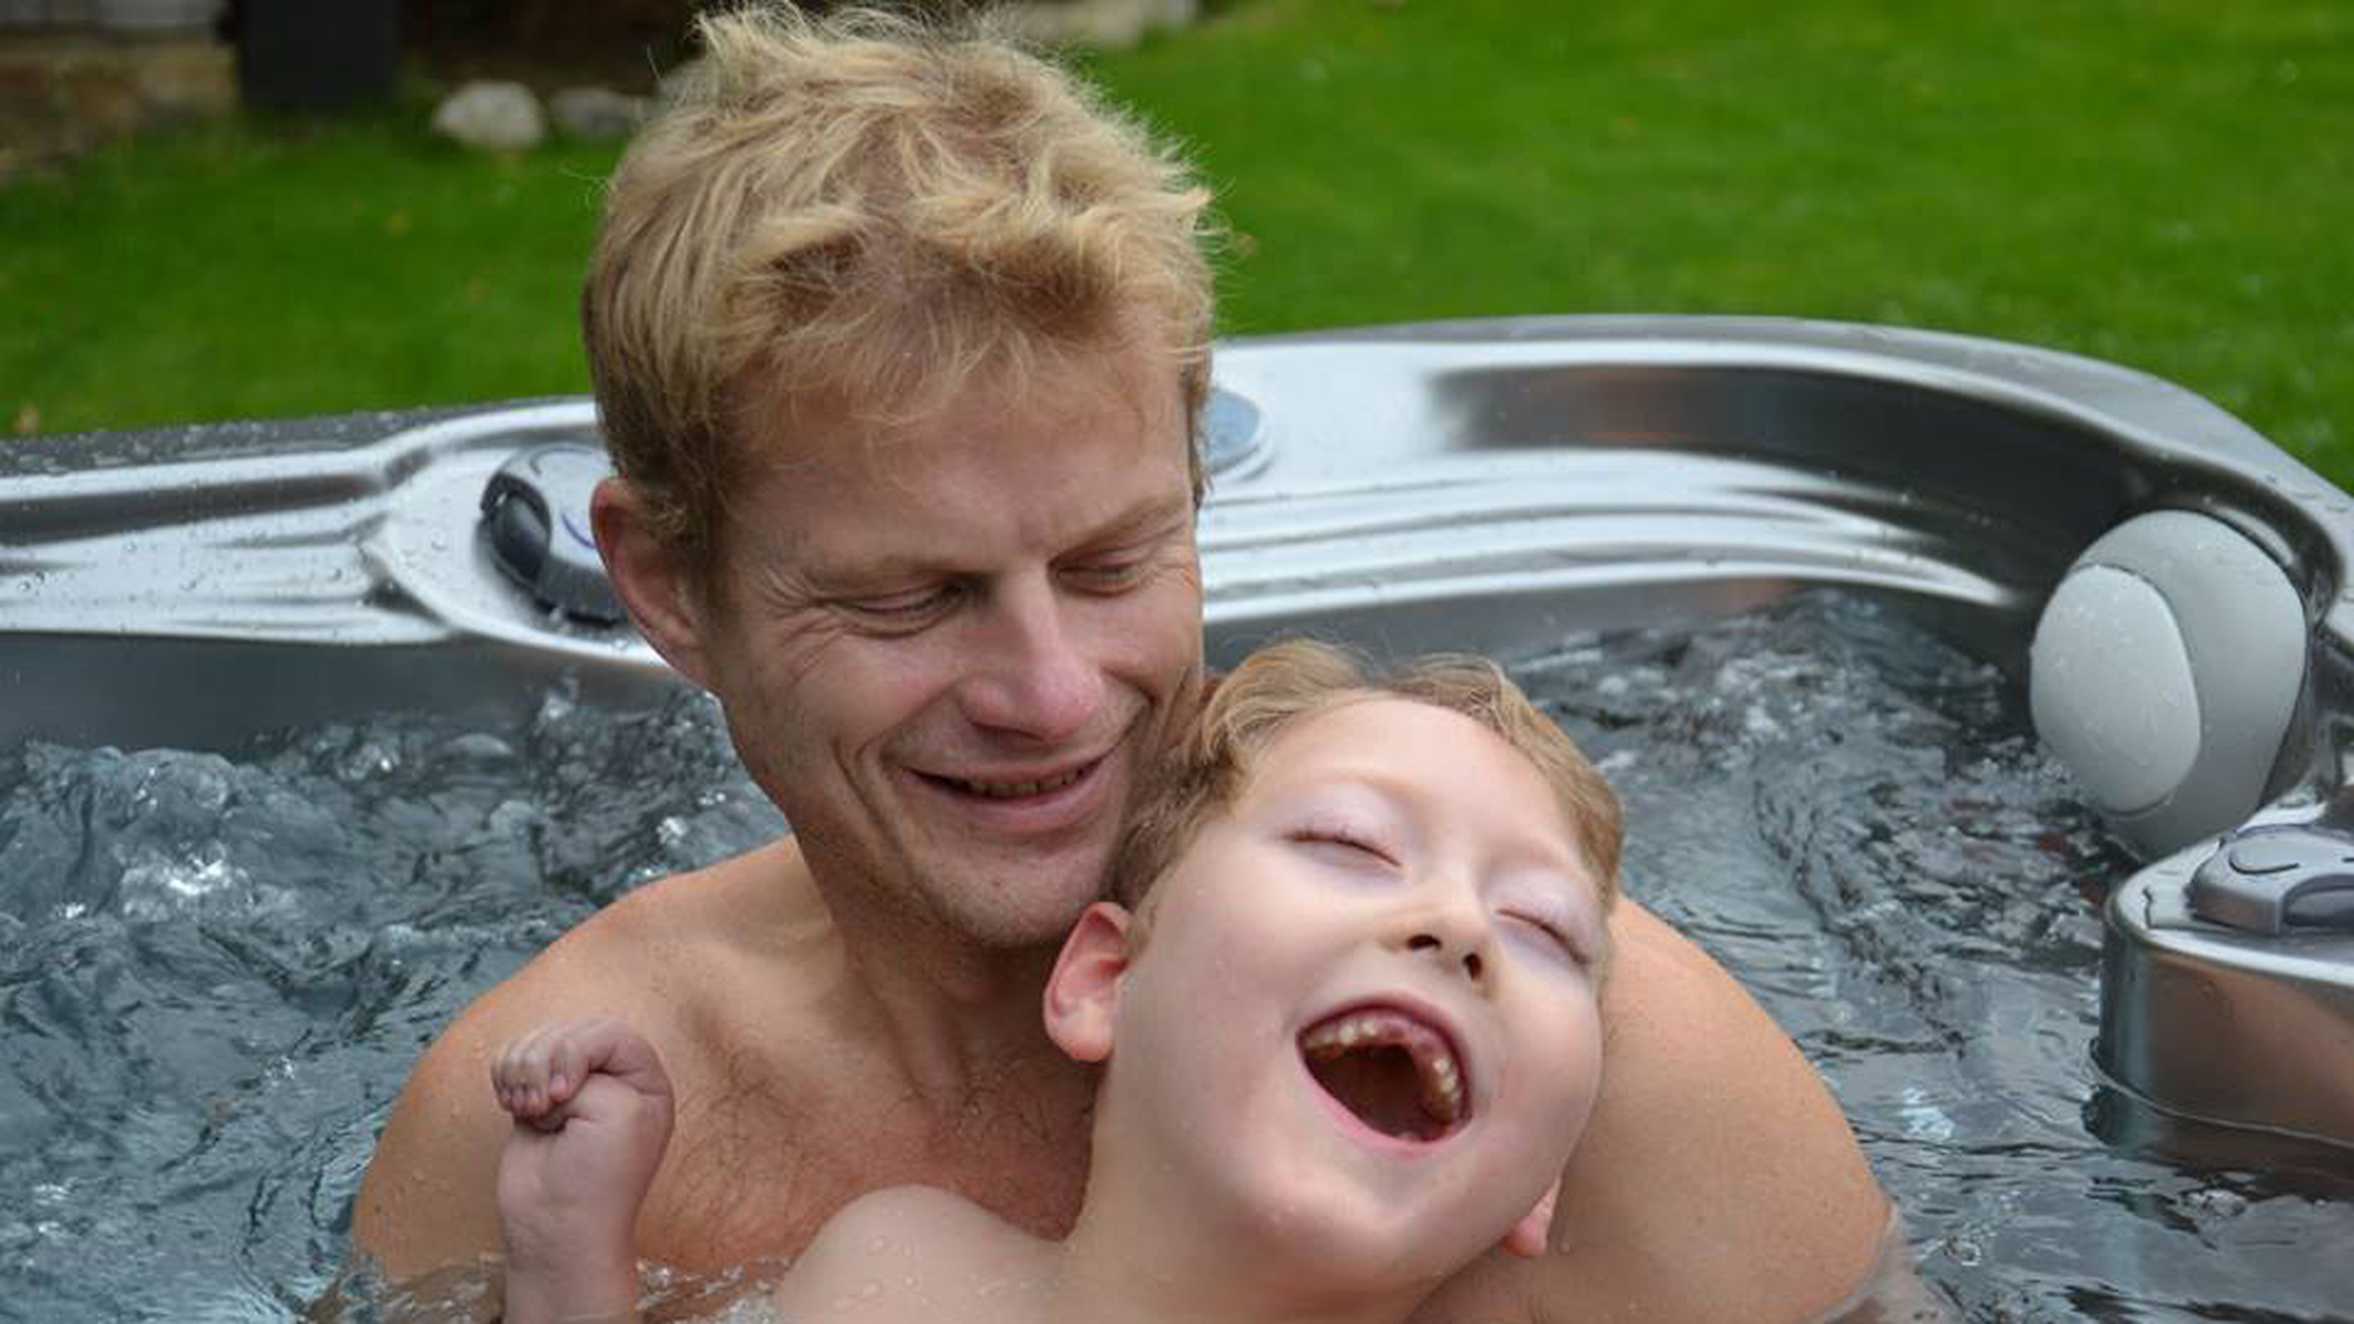 William enjoying the spa pool with his dad